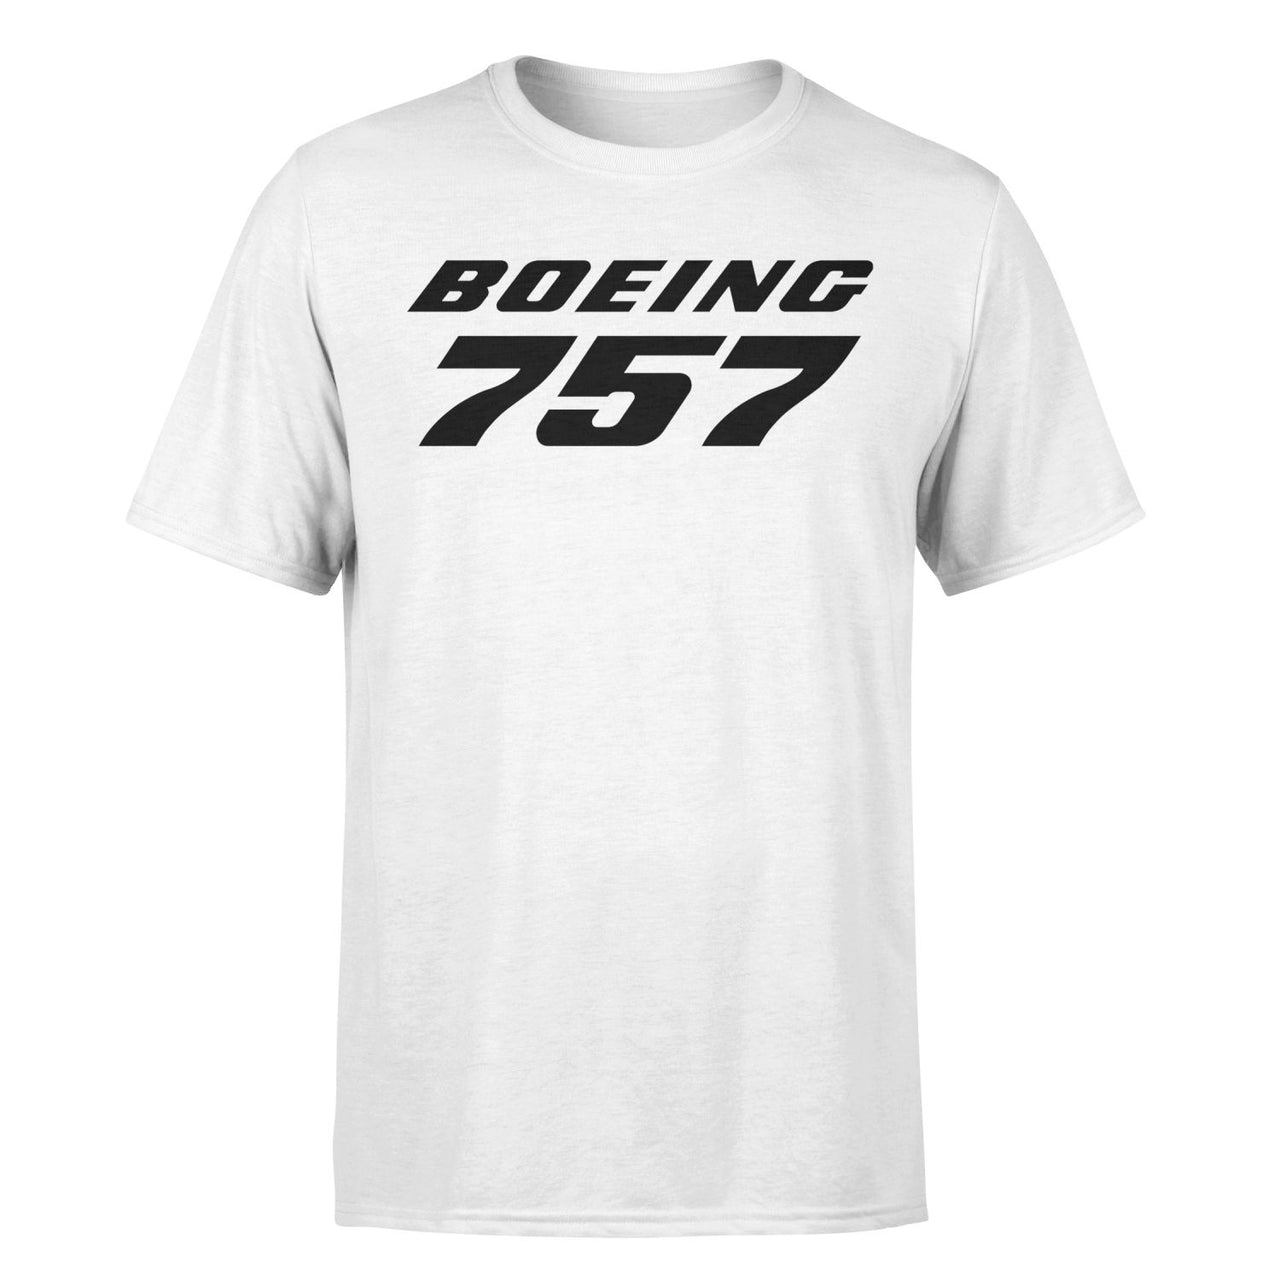 Boeing 757 & Text Designed T-Shirts